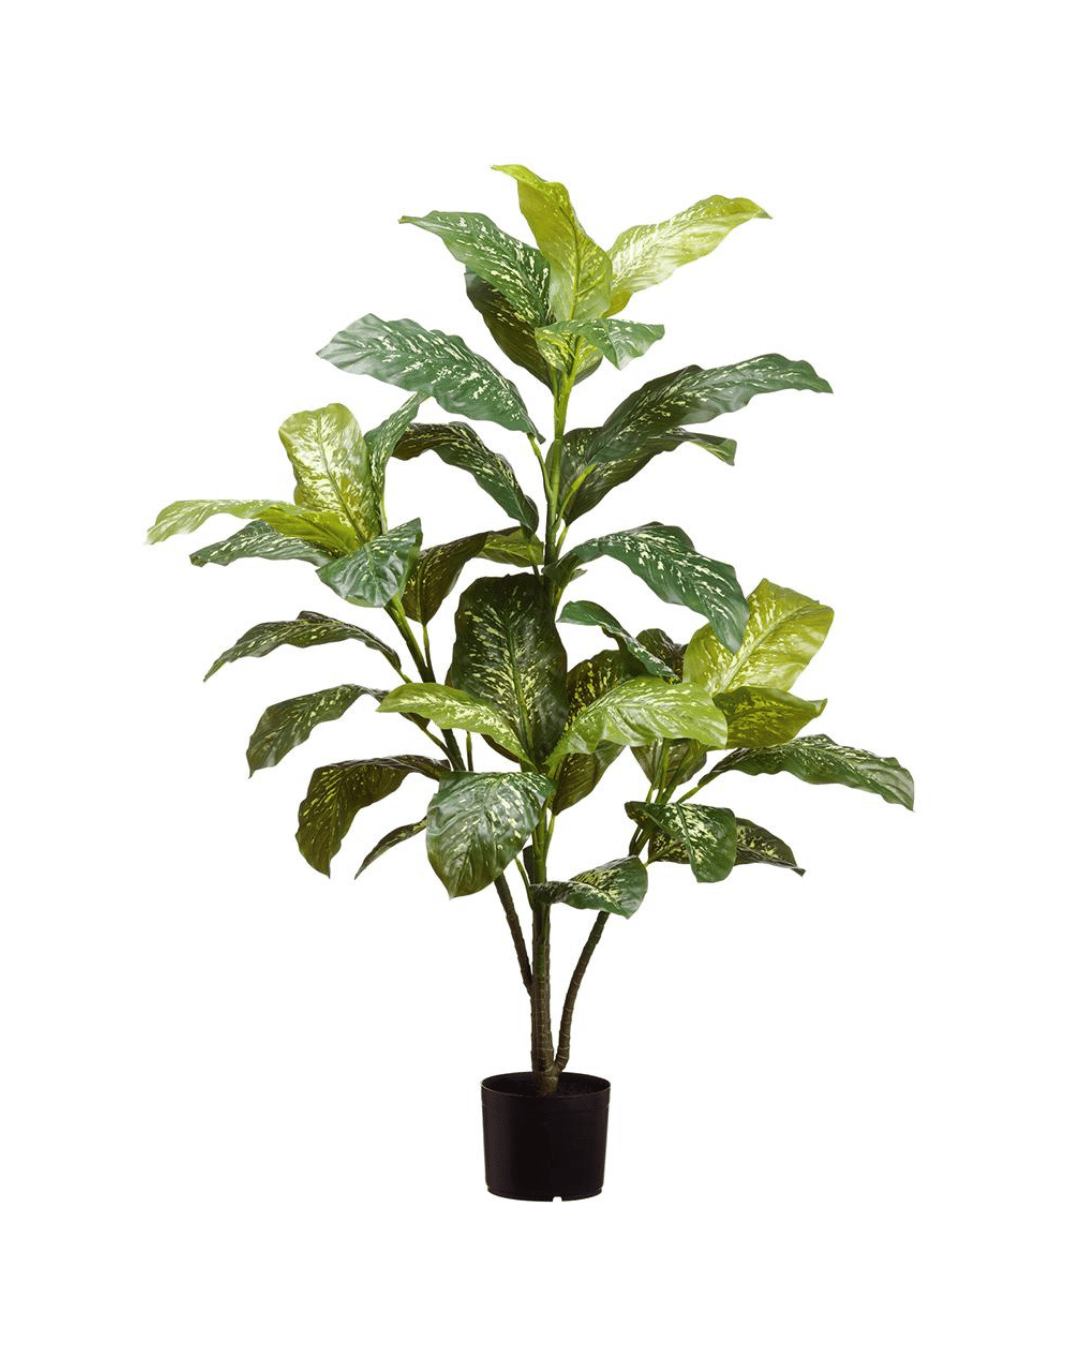 A vibrant, lush green AllState Floral And Craft potted plant with glossy leaves, isolated on a white background, perfect for a Scottsdale Arizona bungalow.